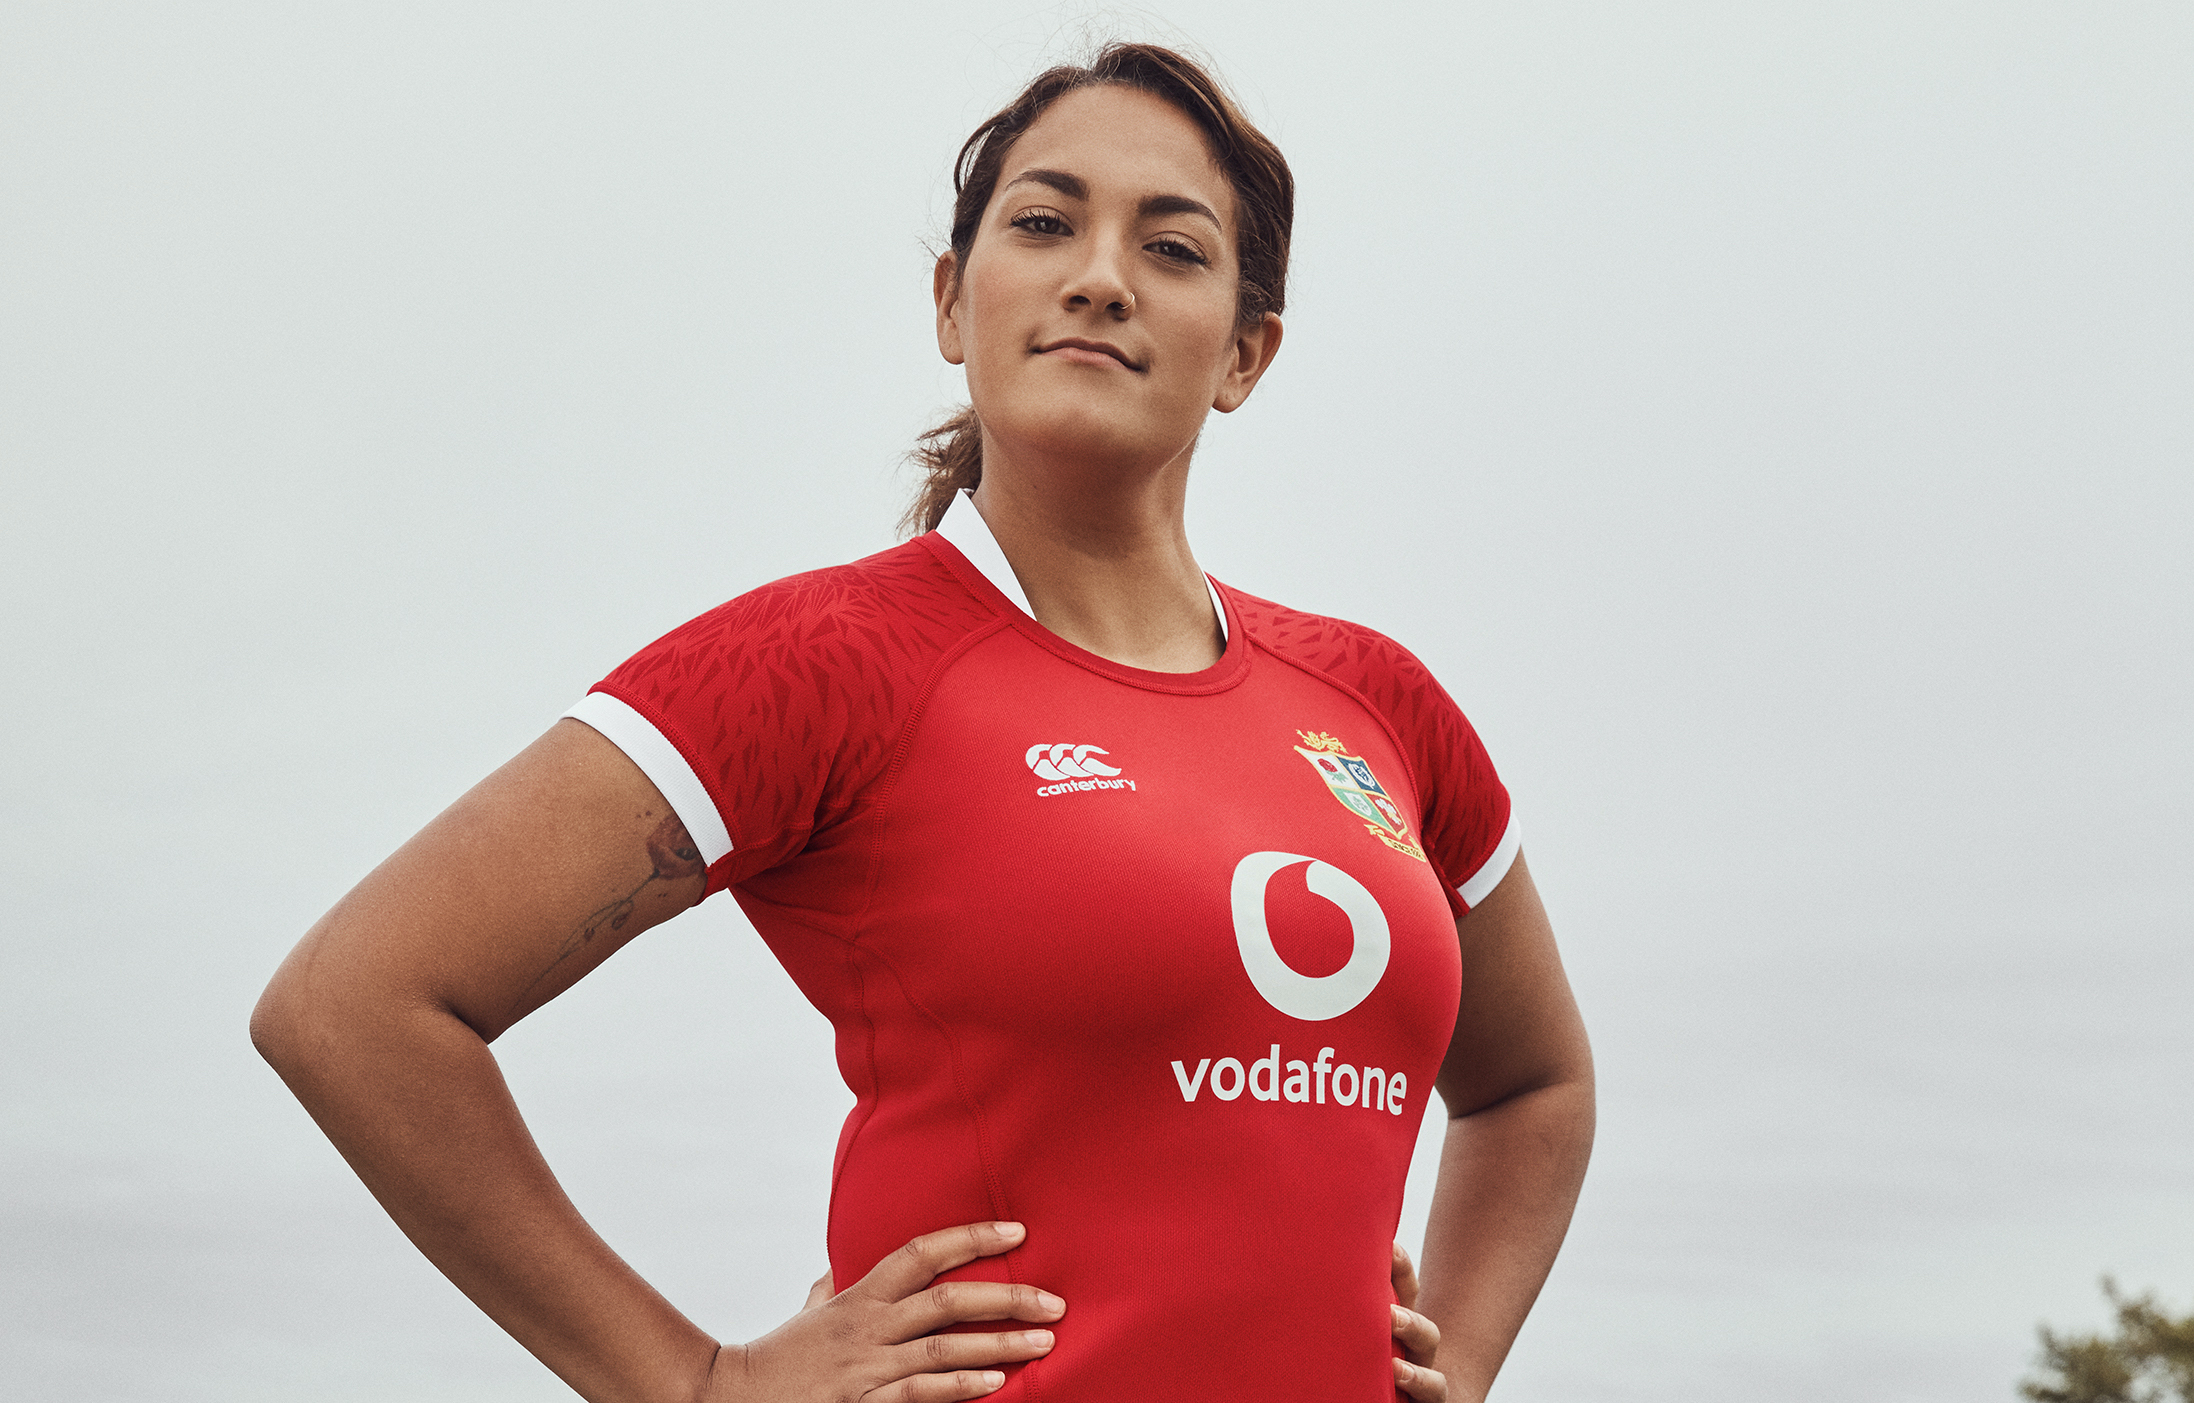 new lions rugby jersey 2020